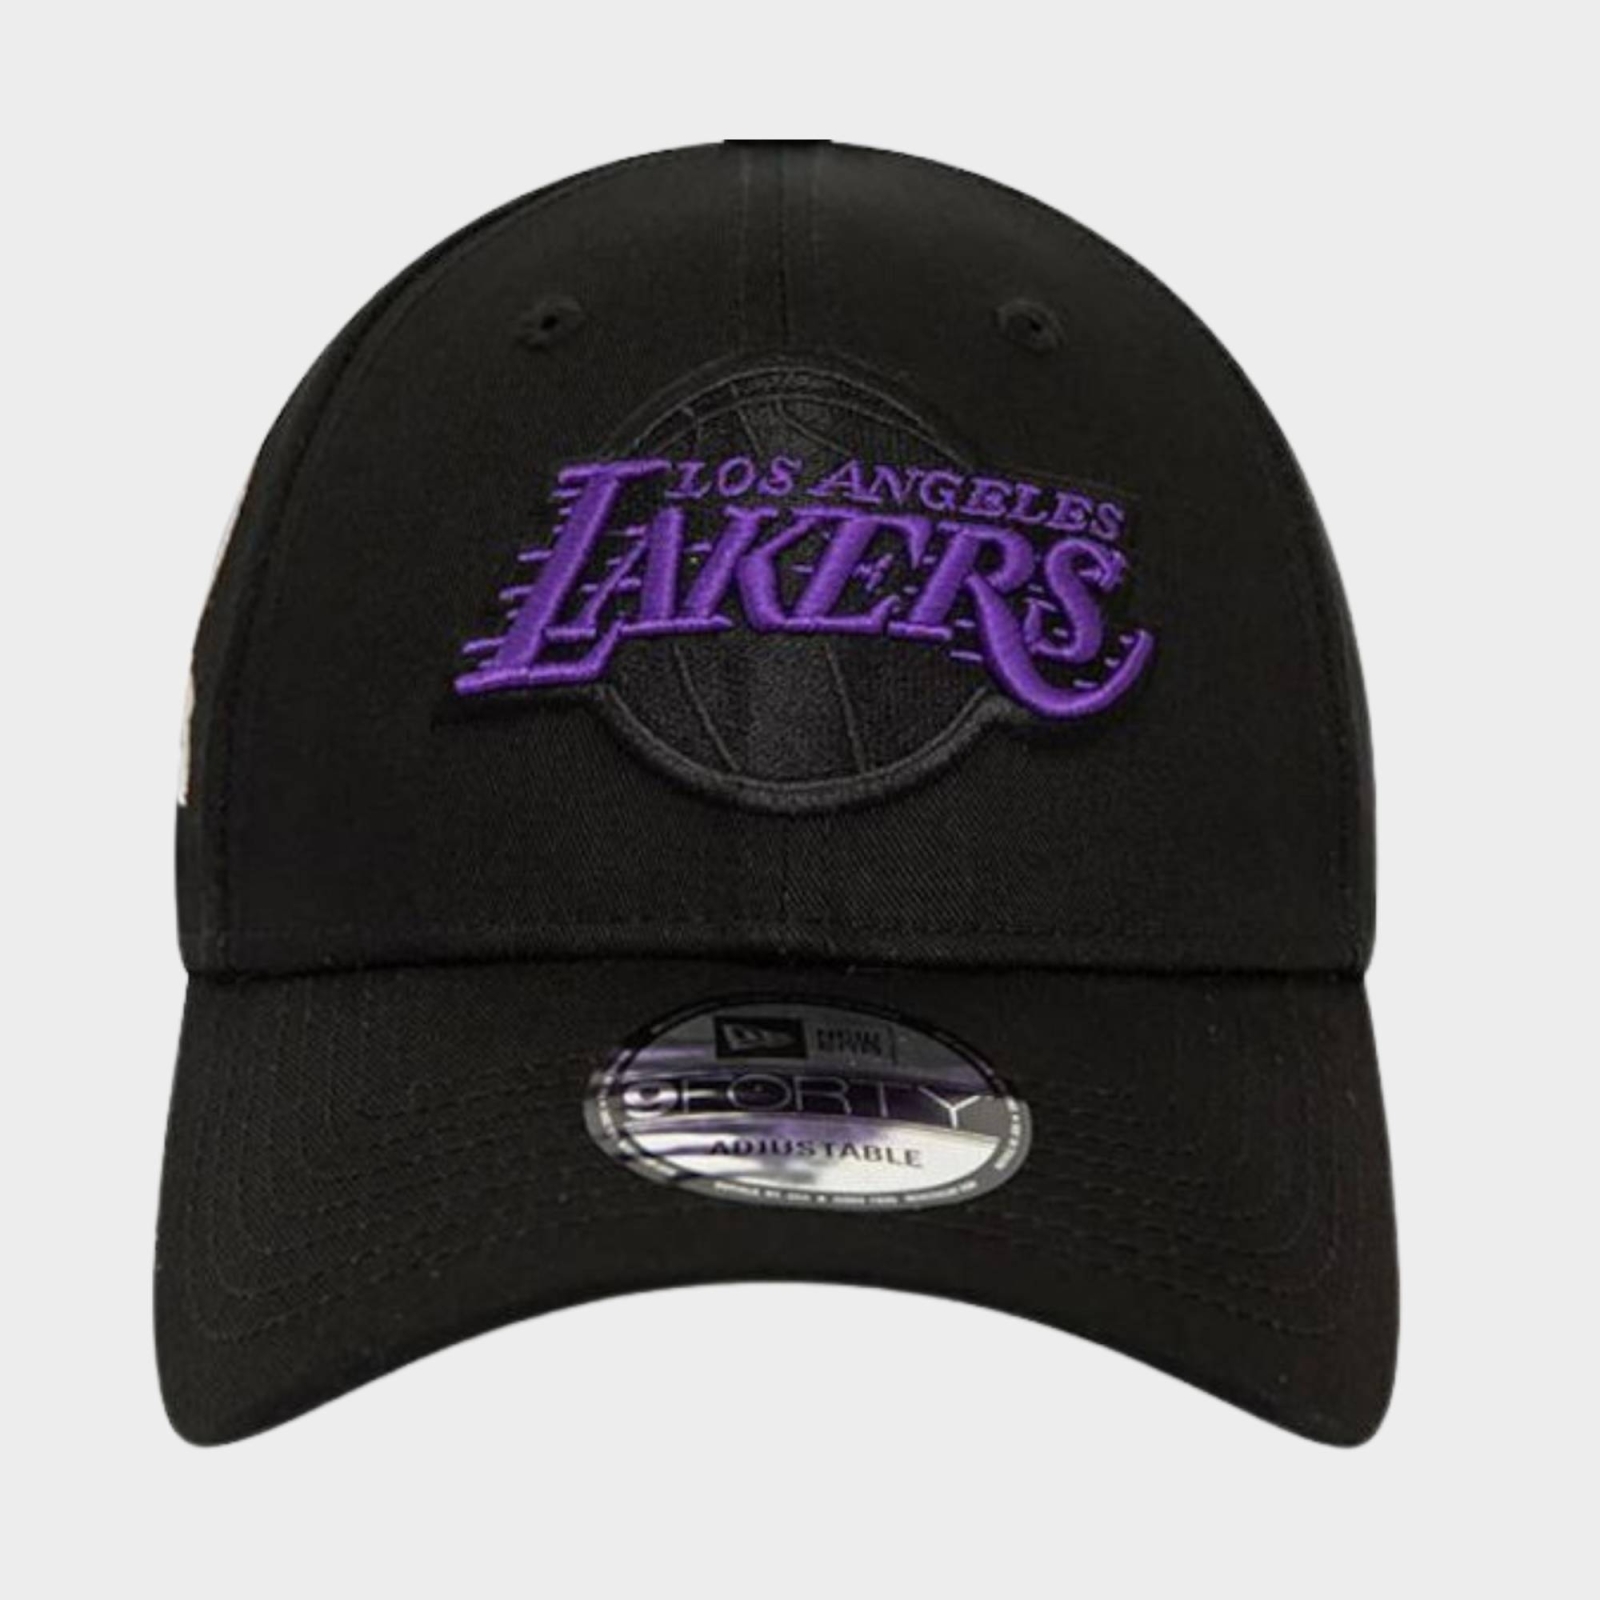 NEW ERA LOS ANGELES LAKERS SIDE PATCH 9FORTY CAP